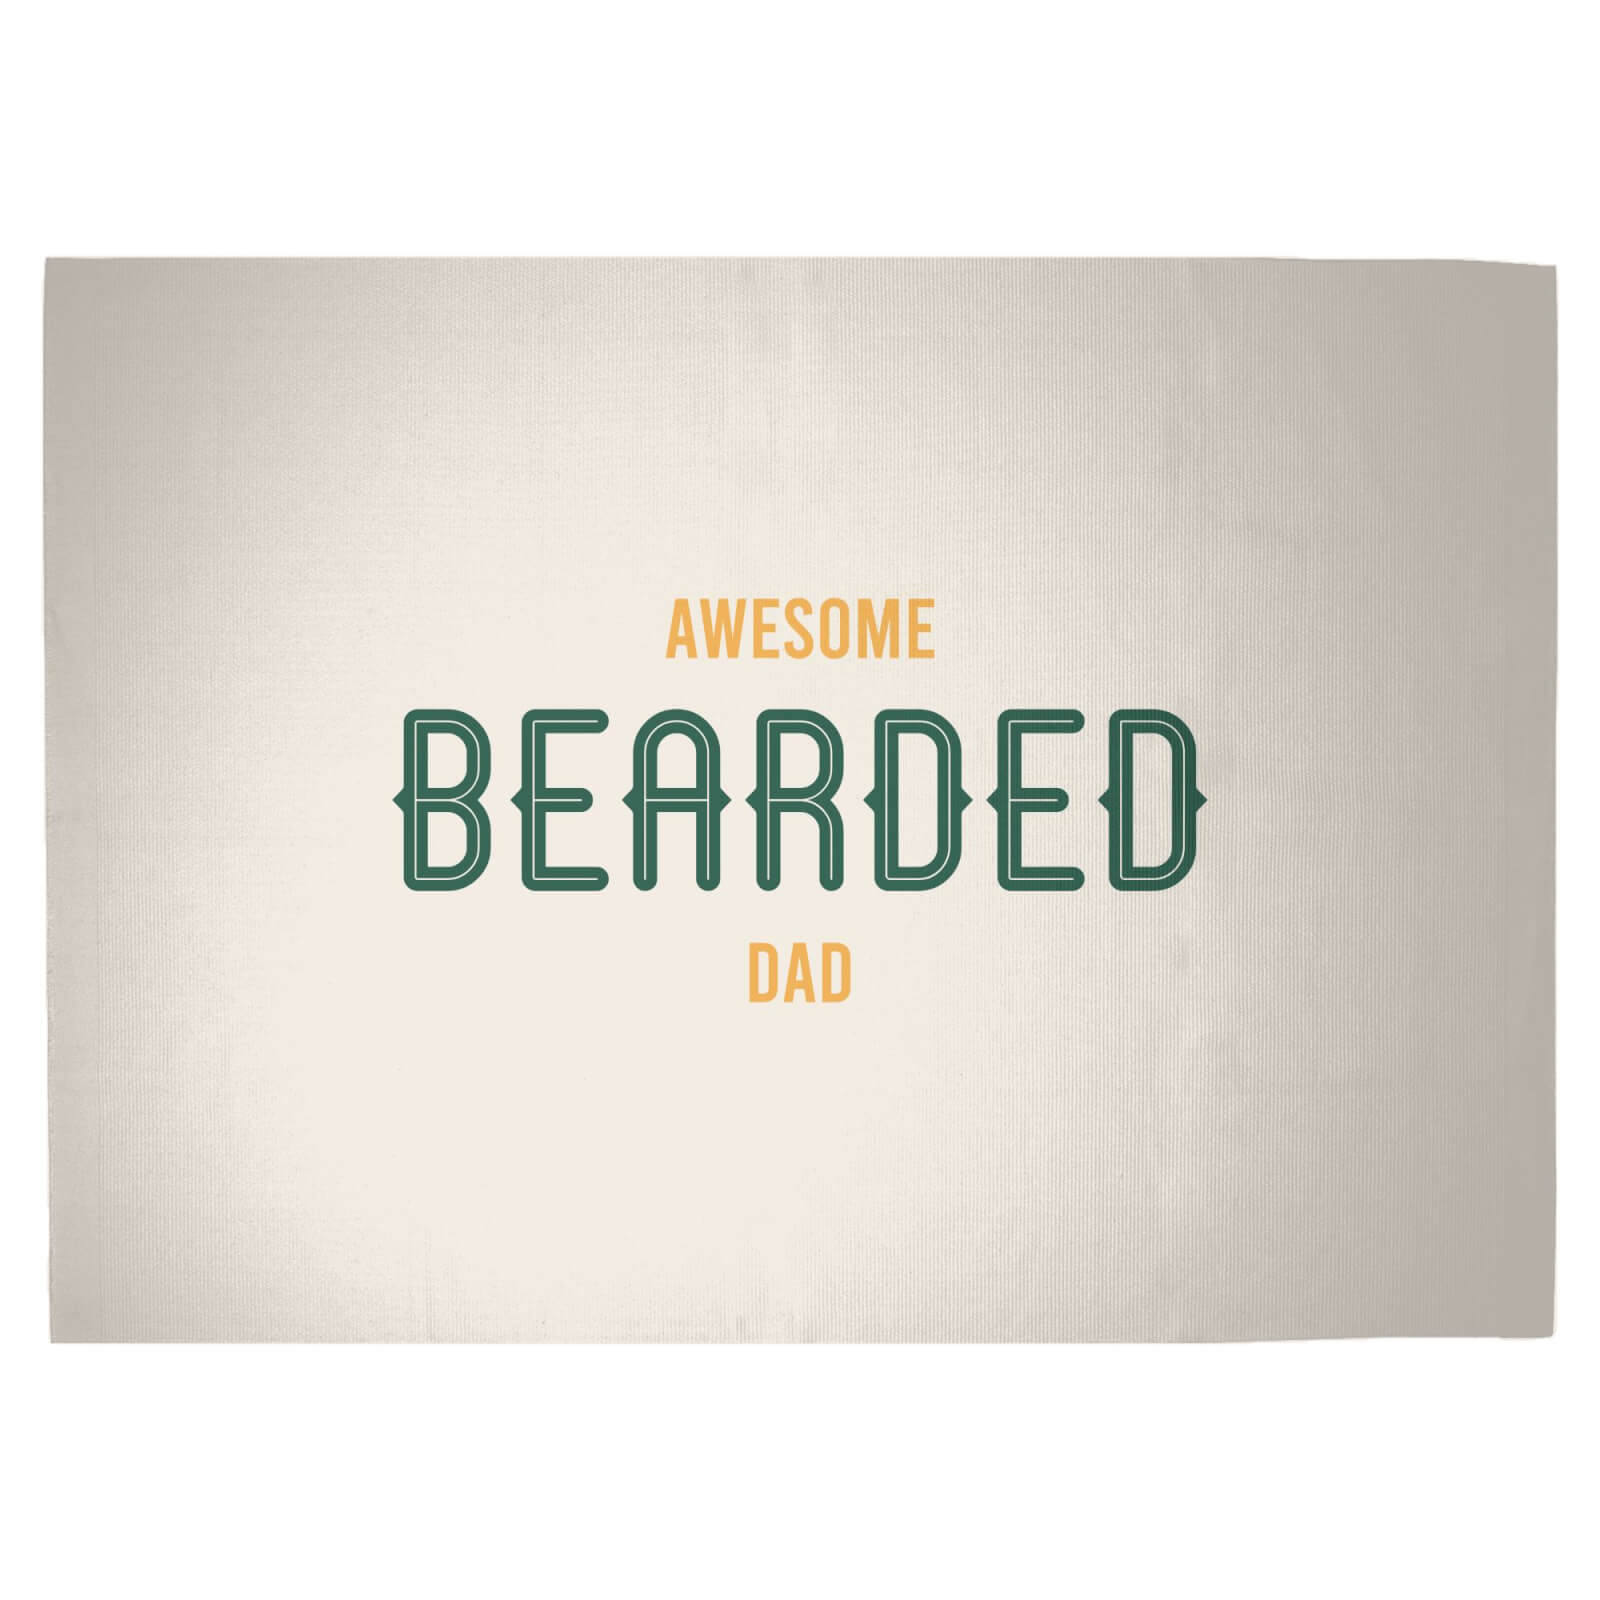 Awesome Bearded Dad Woven Rug - Large